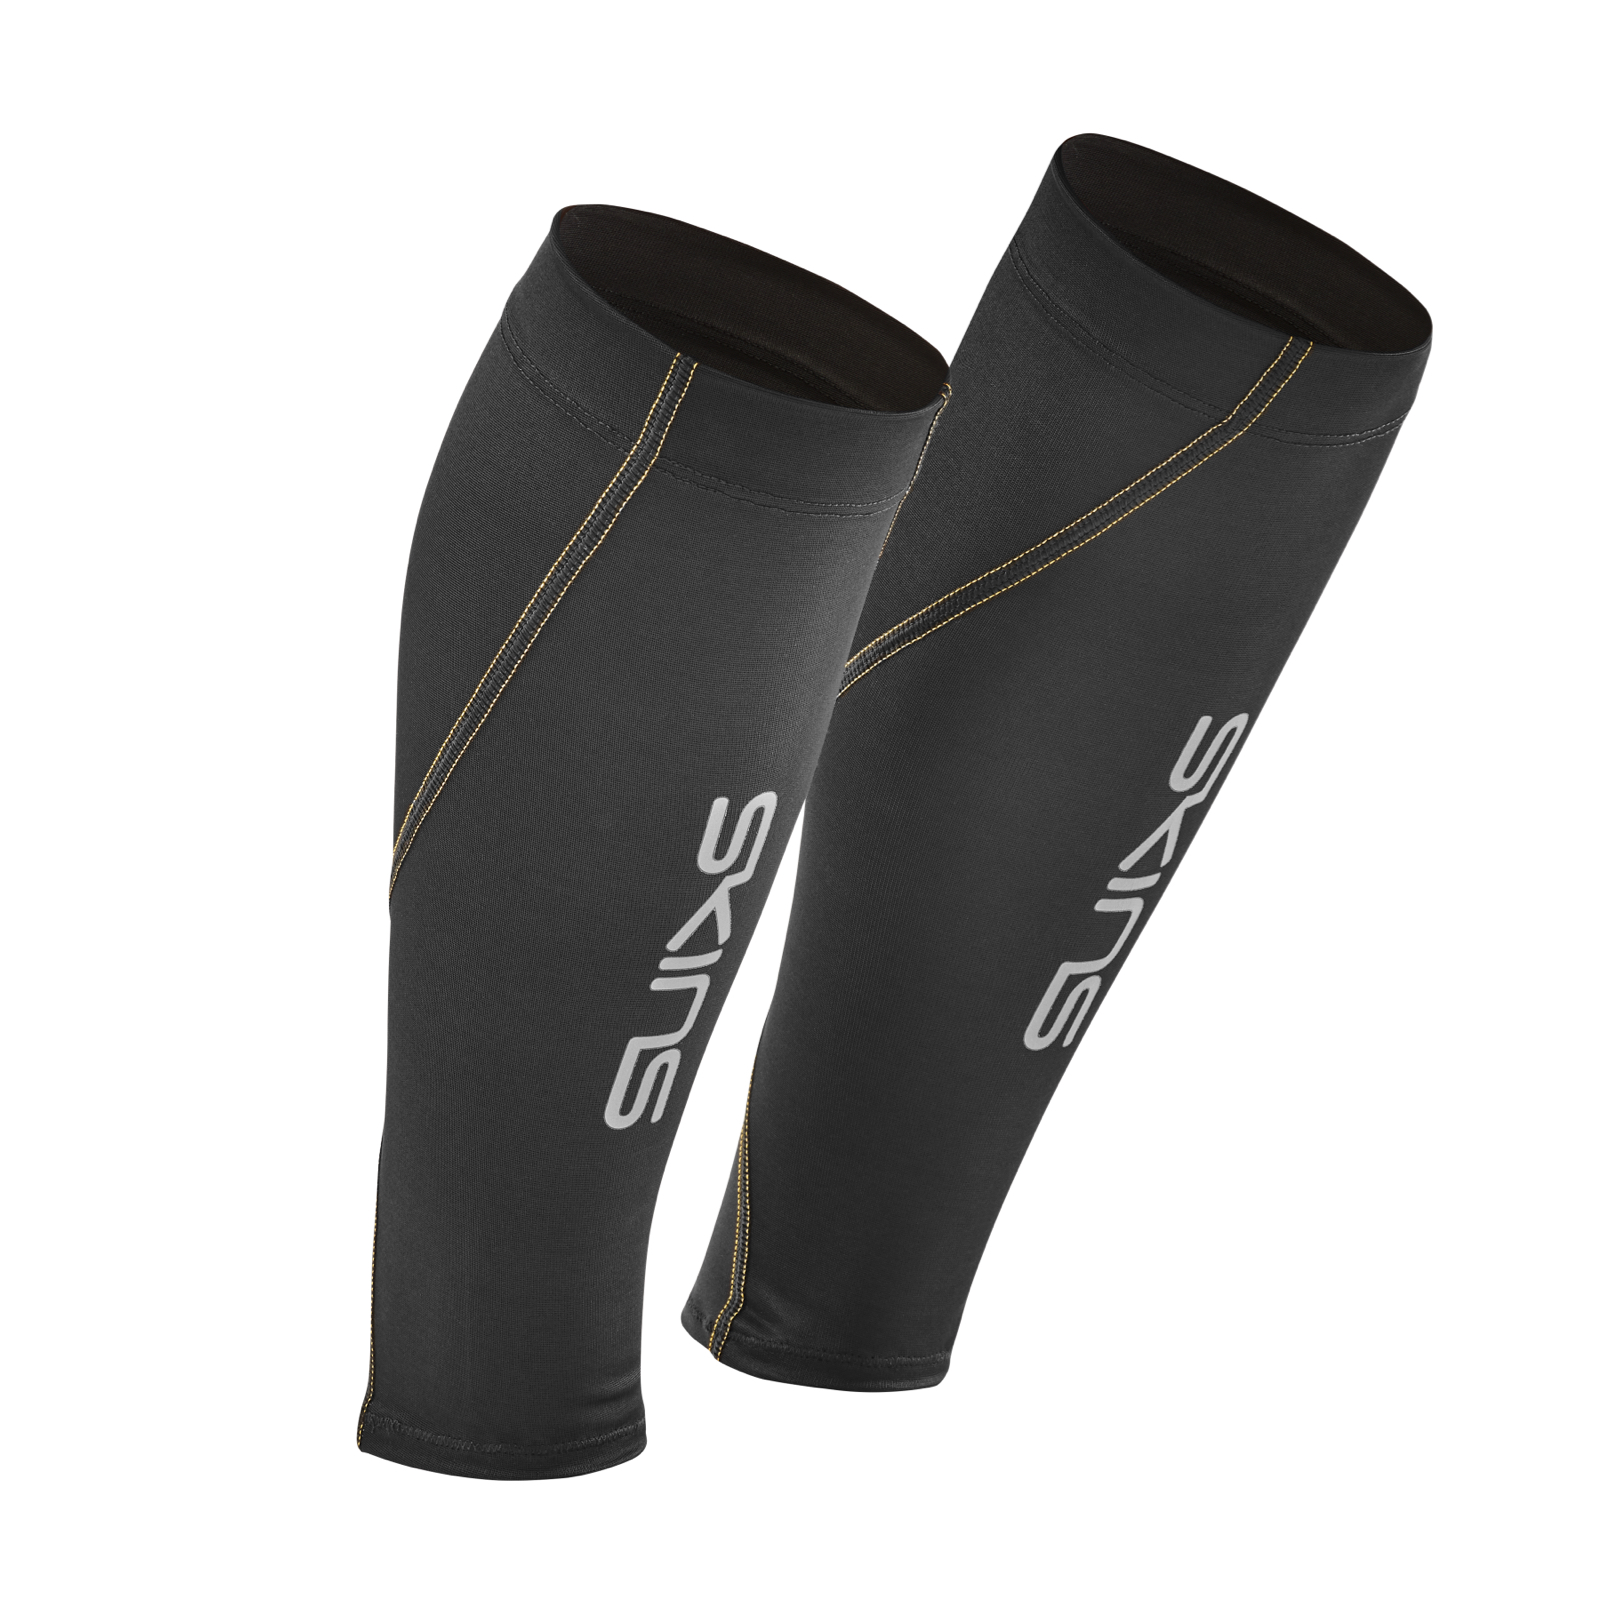 SKINS SERIES-3 UNISEX RECOVERY MX CALF SLEEVE BLACK - SKINS Compression USA